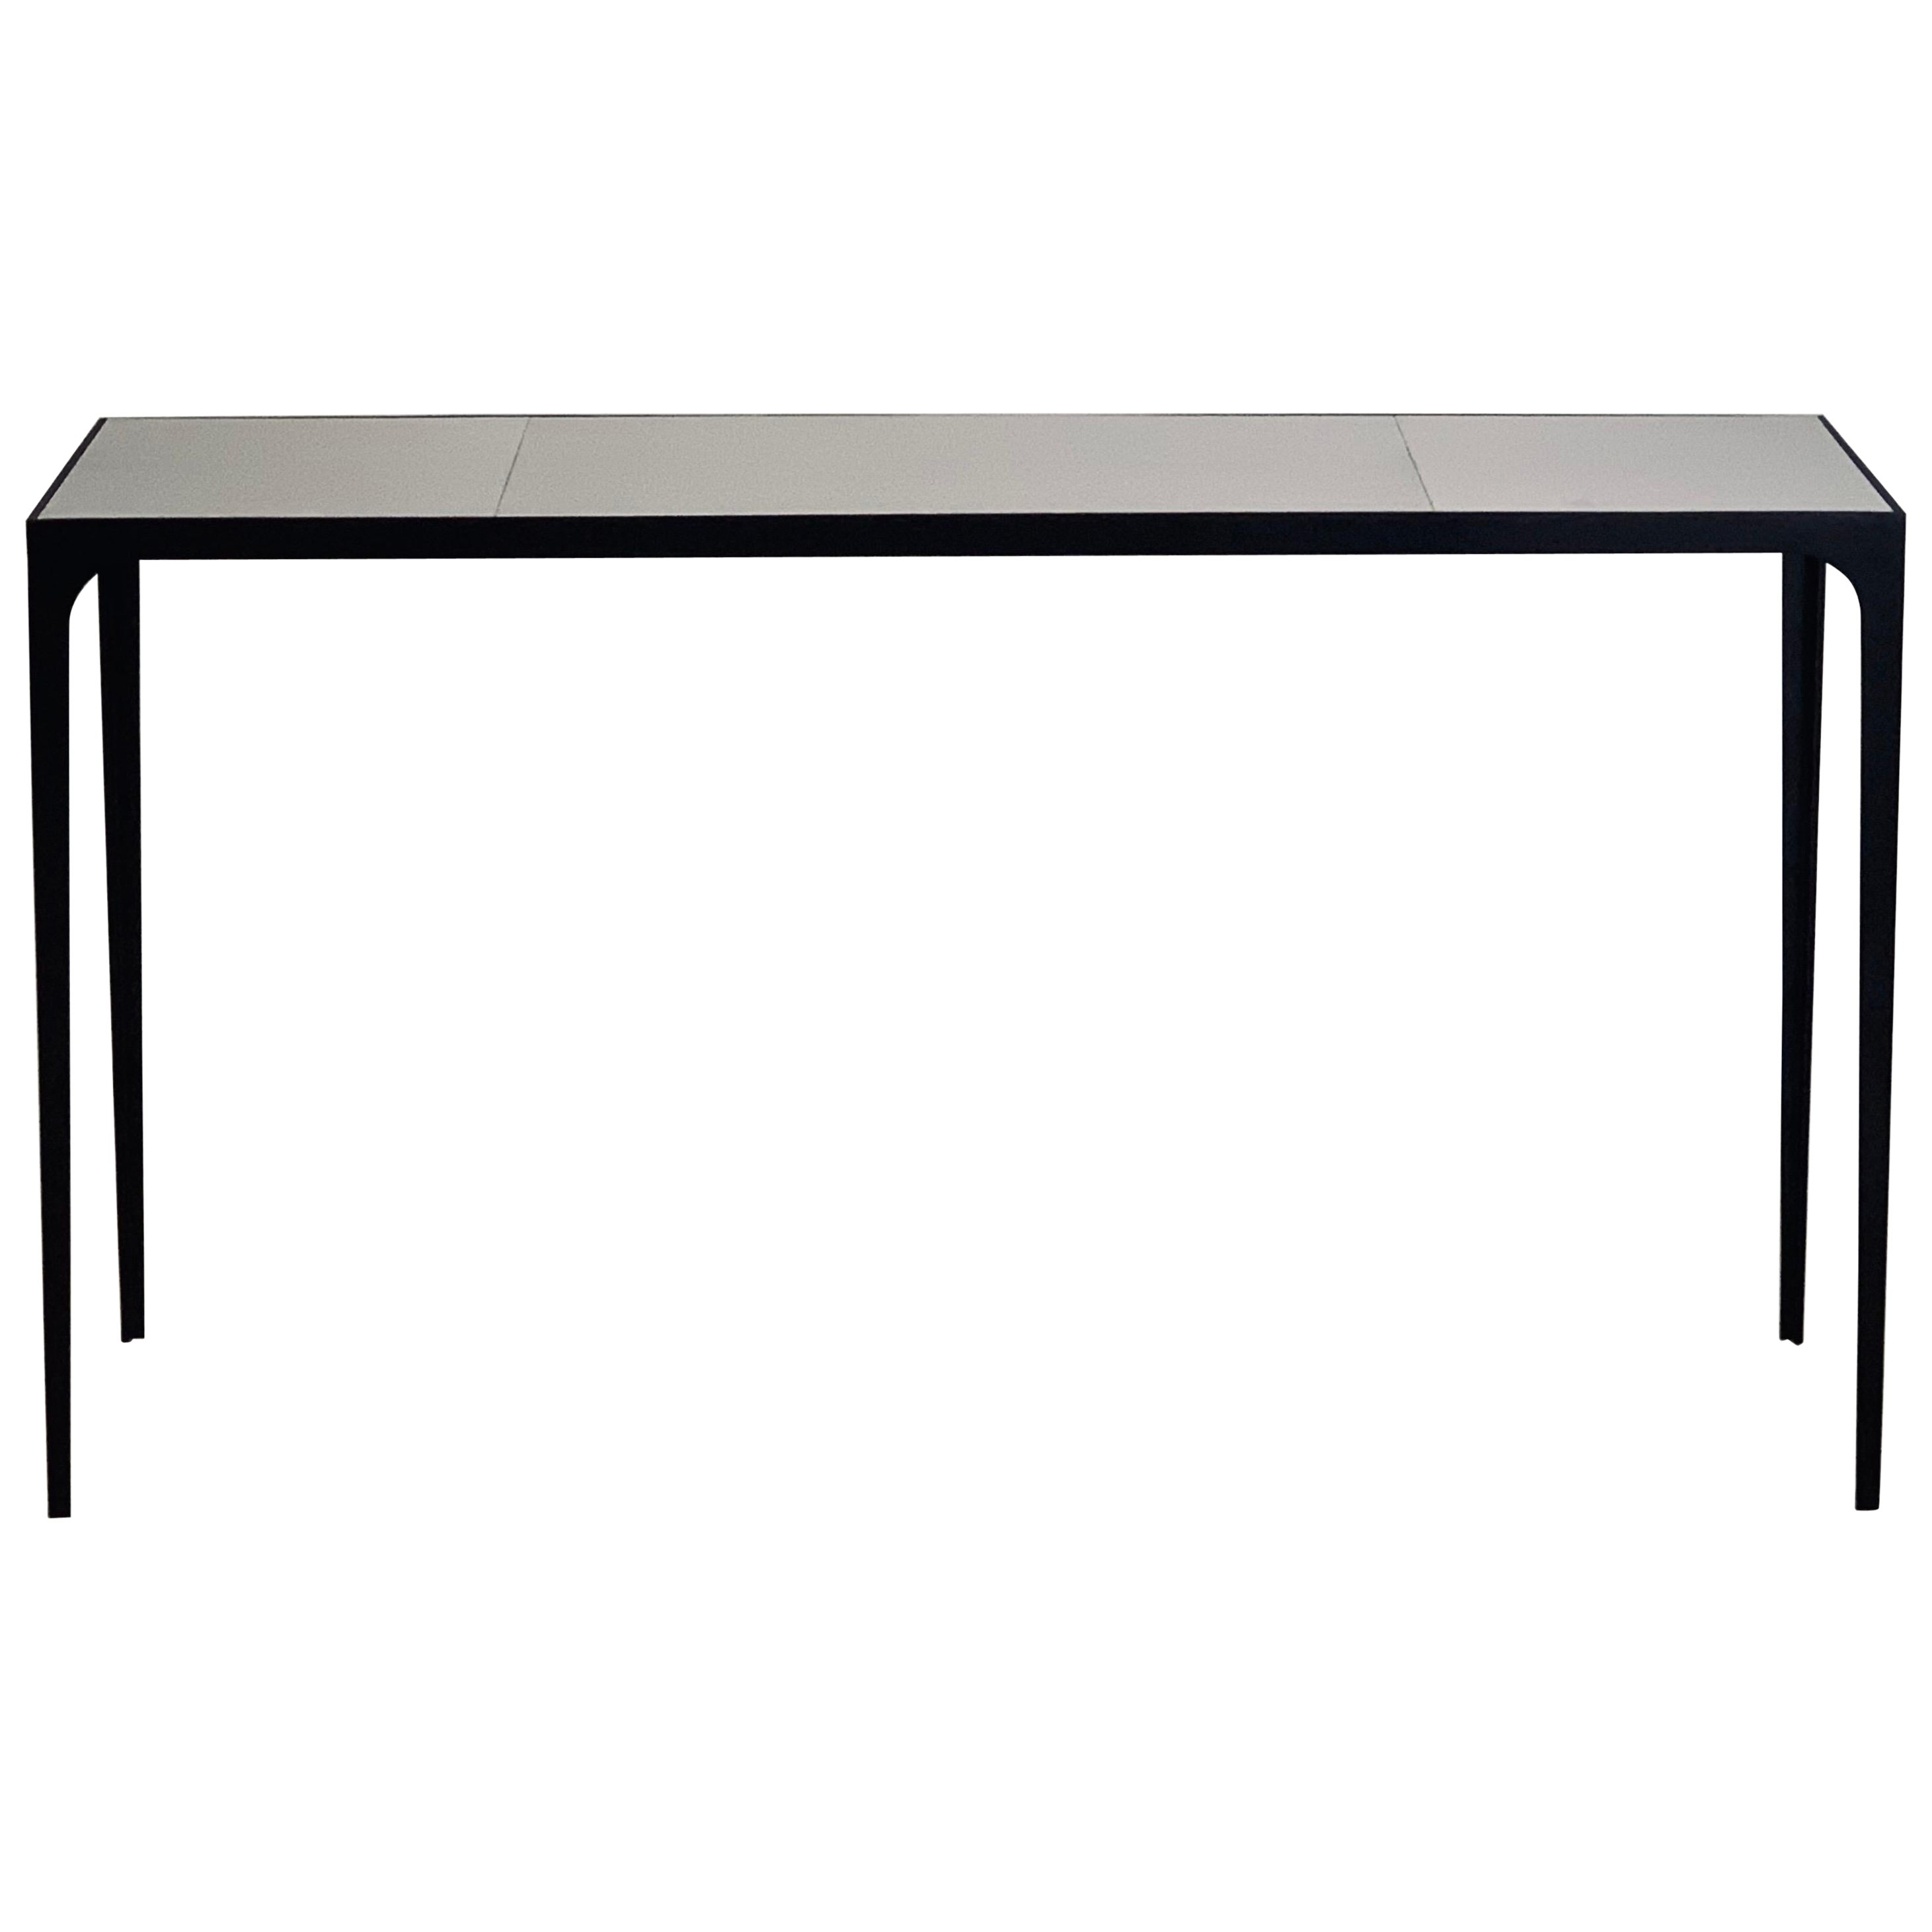 Wide 'Esquisse' Wrought Iron Parchment Console or Library Table by Design Frères For Sale